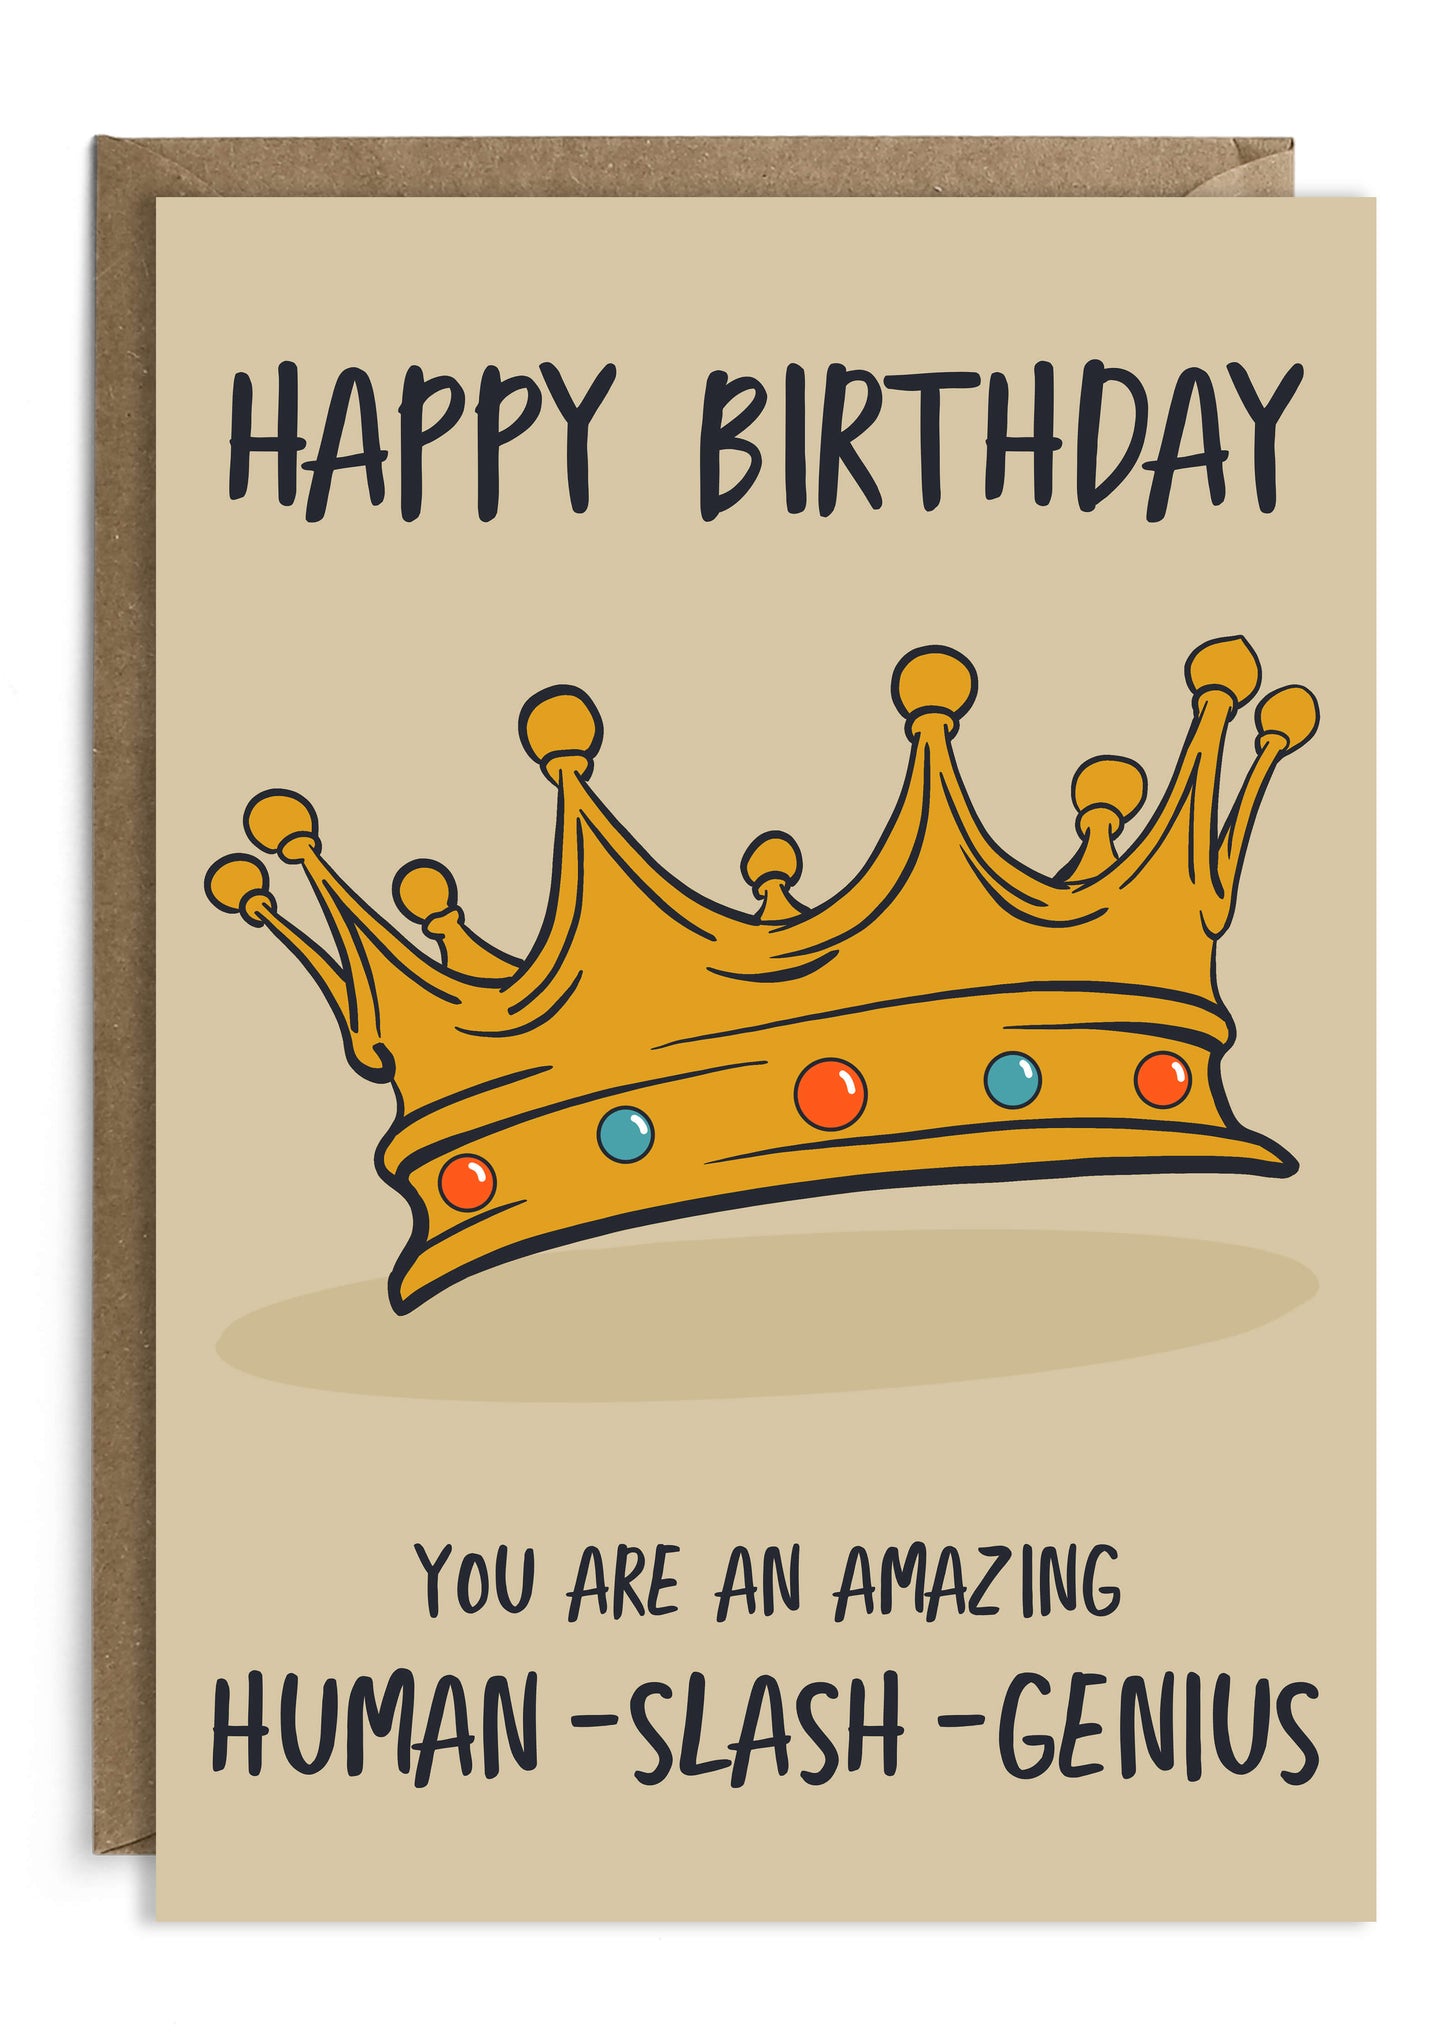 Birthday card inspired by Brooklyn 99 tv show. Featuring crown from the heist. You're an amazing human slash genius.